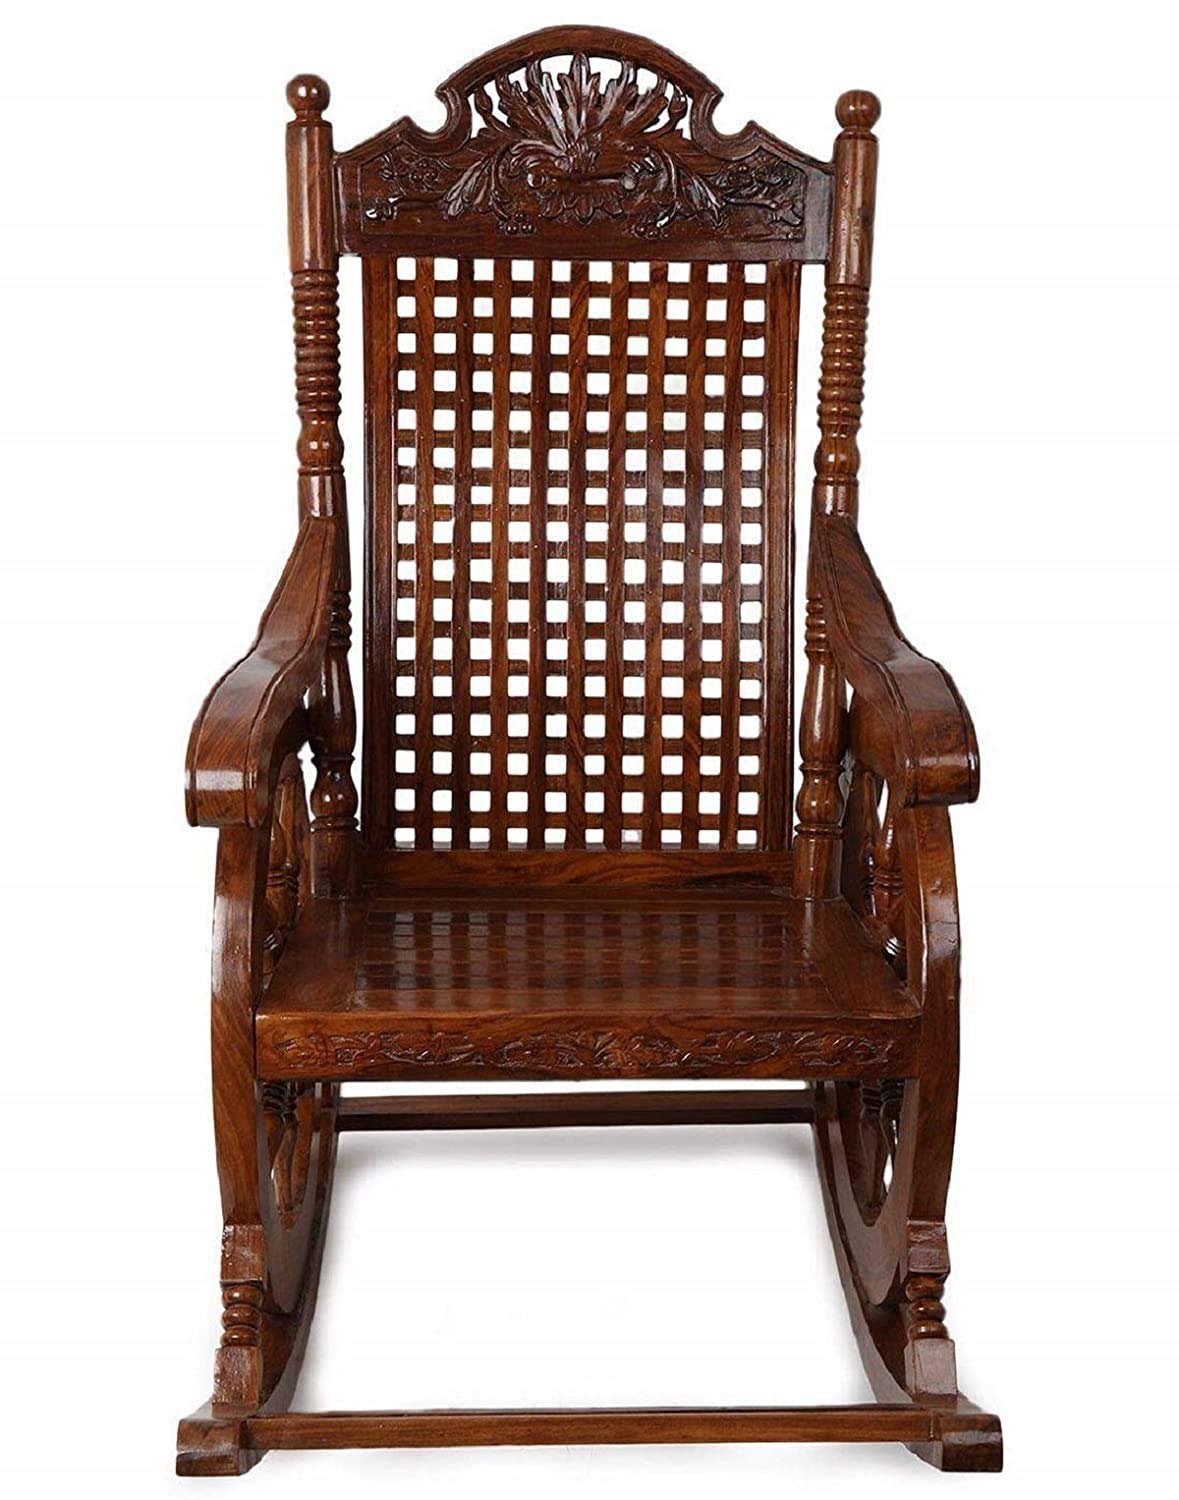 Wooden Rocking Chair , Easy Chair , Rolling Chair for Living Room | Chair for Bedroom | Rocking Chair for Adults & Grandparents Dime Store